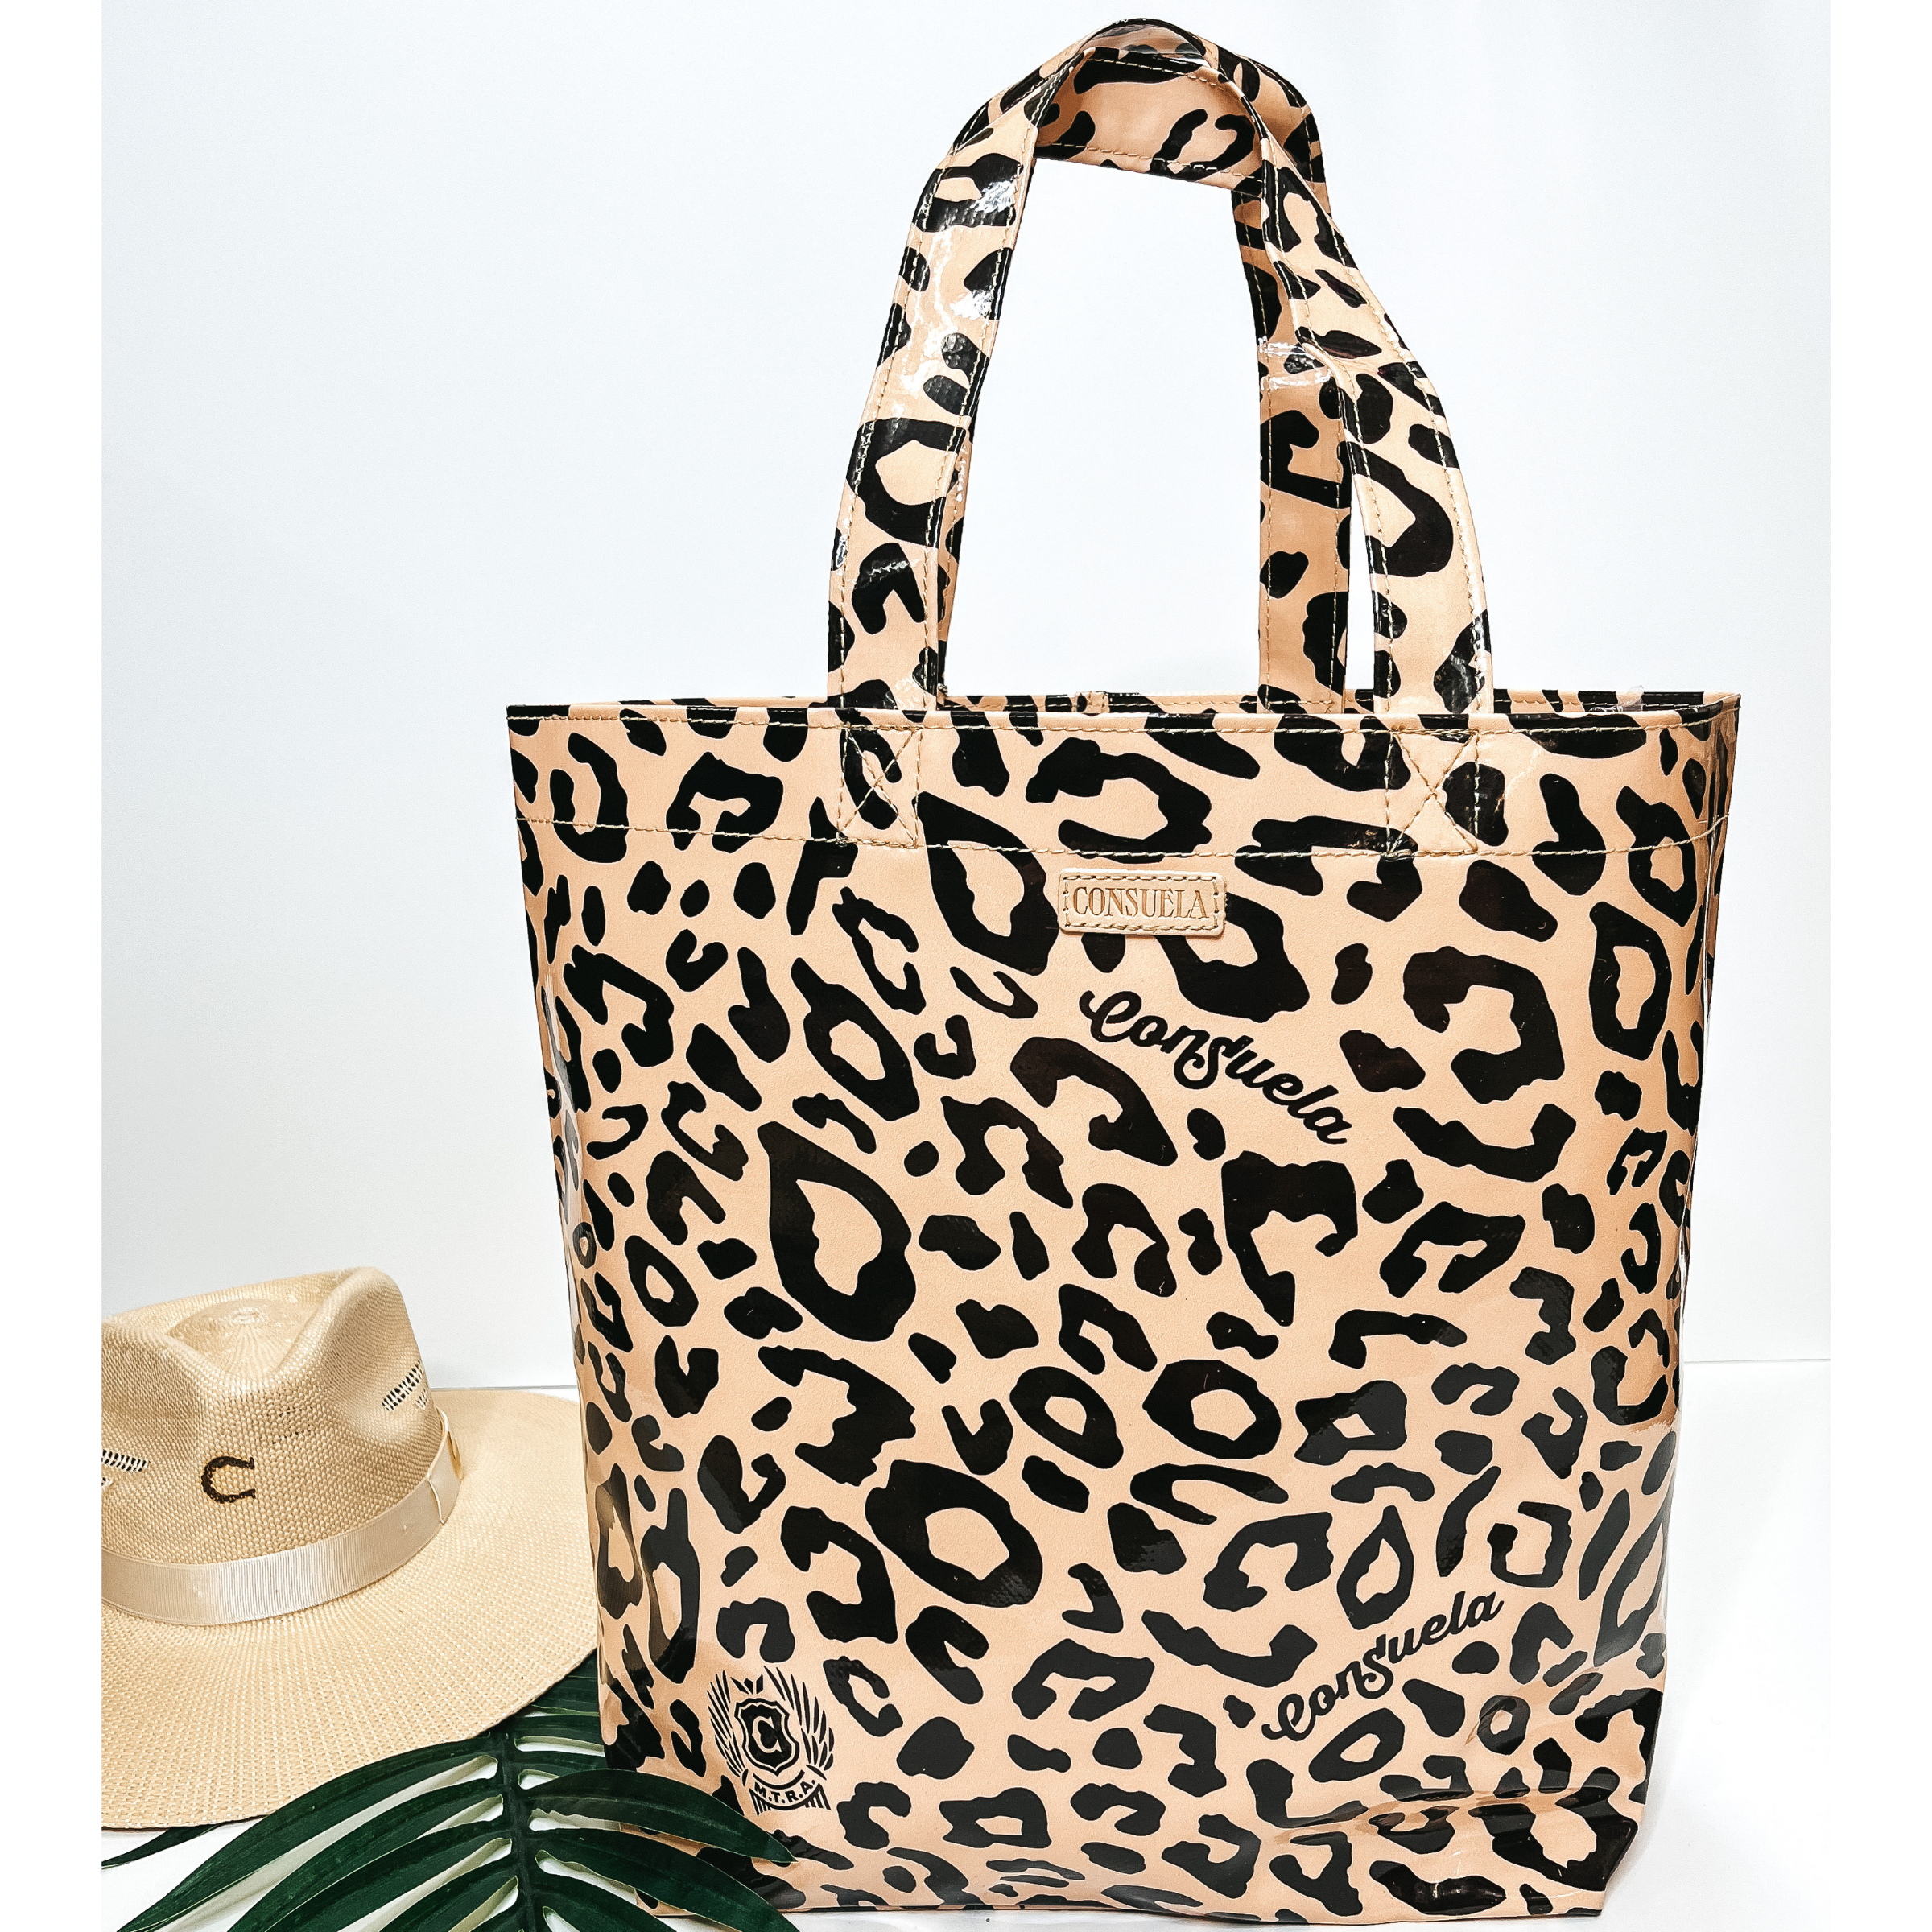 A large size leopard print bag with handles. Pictured on white background with palm leaf and straw hat.